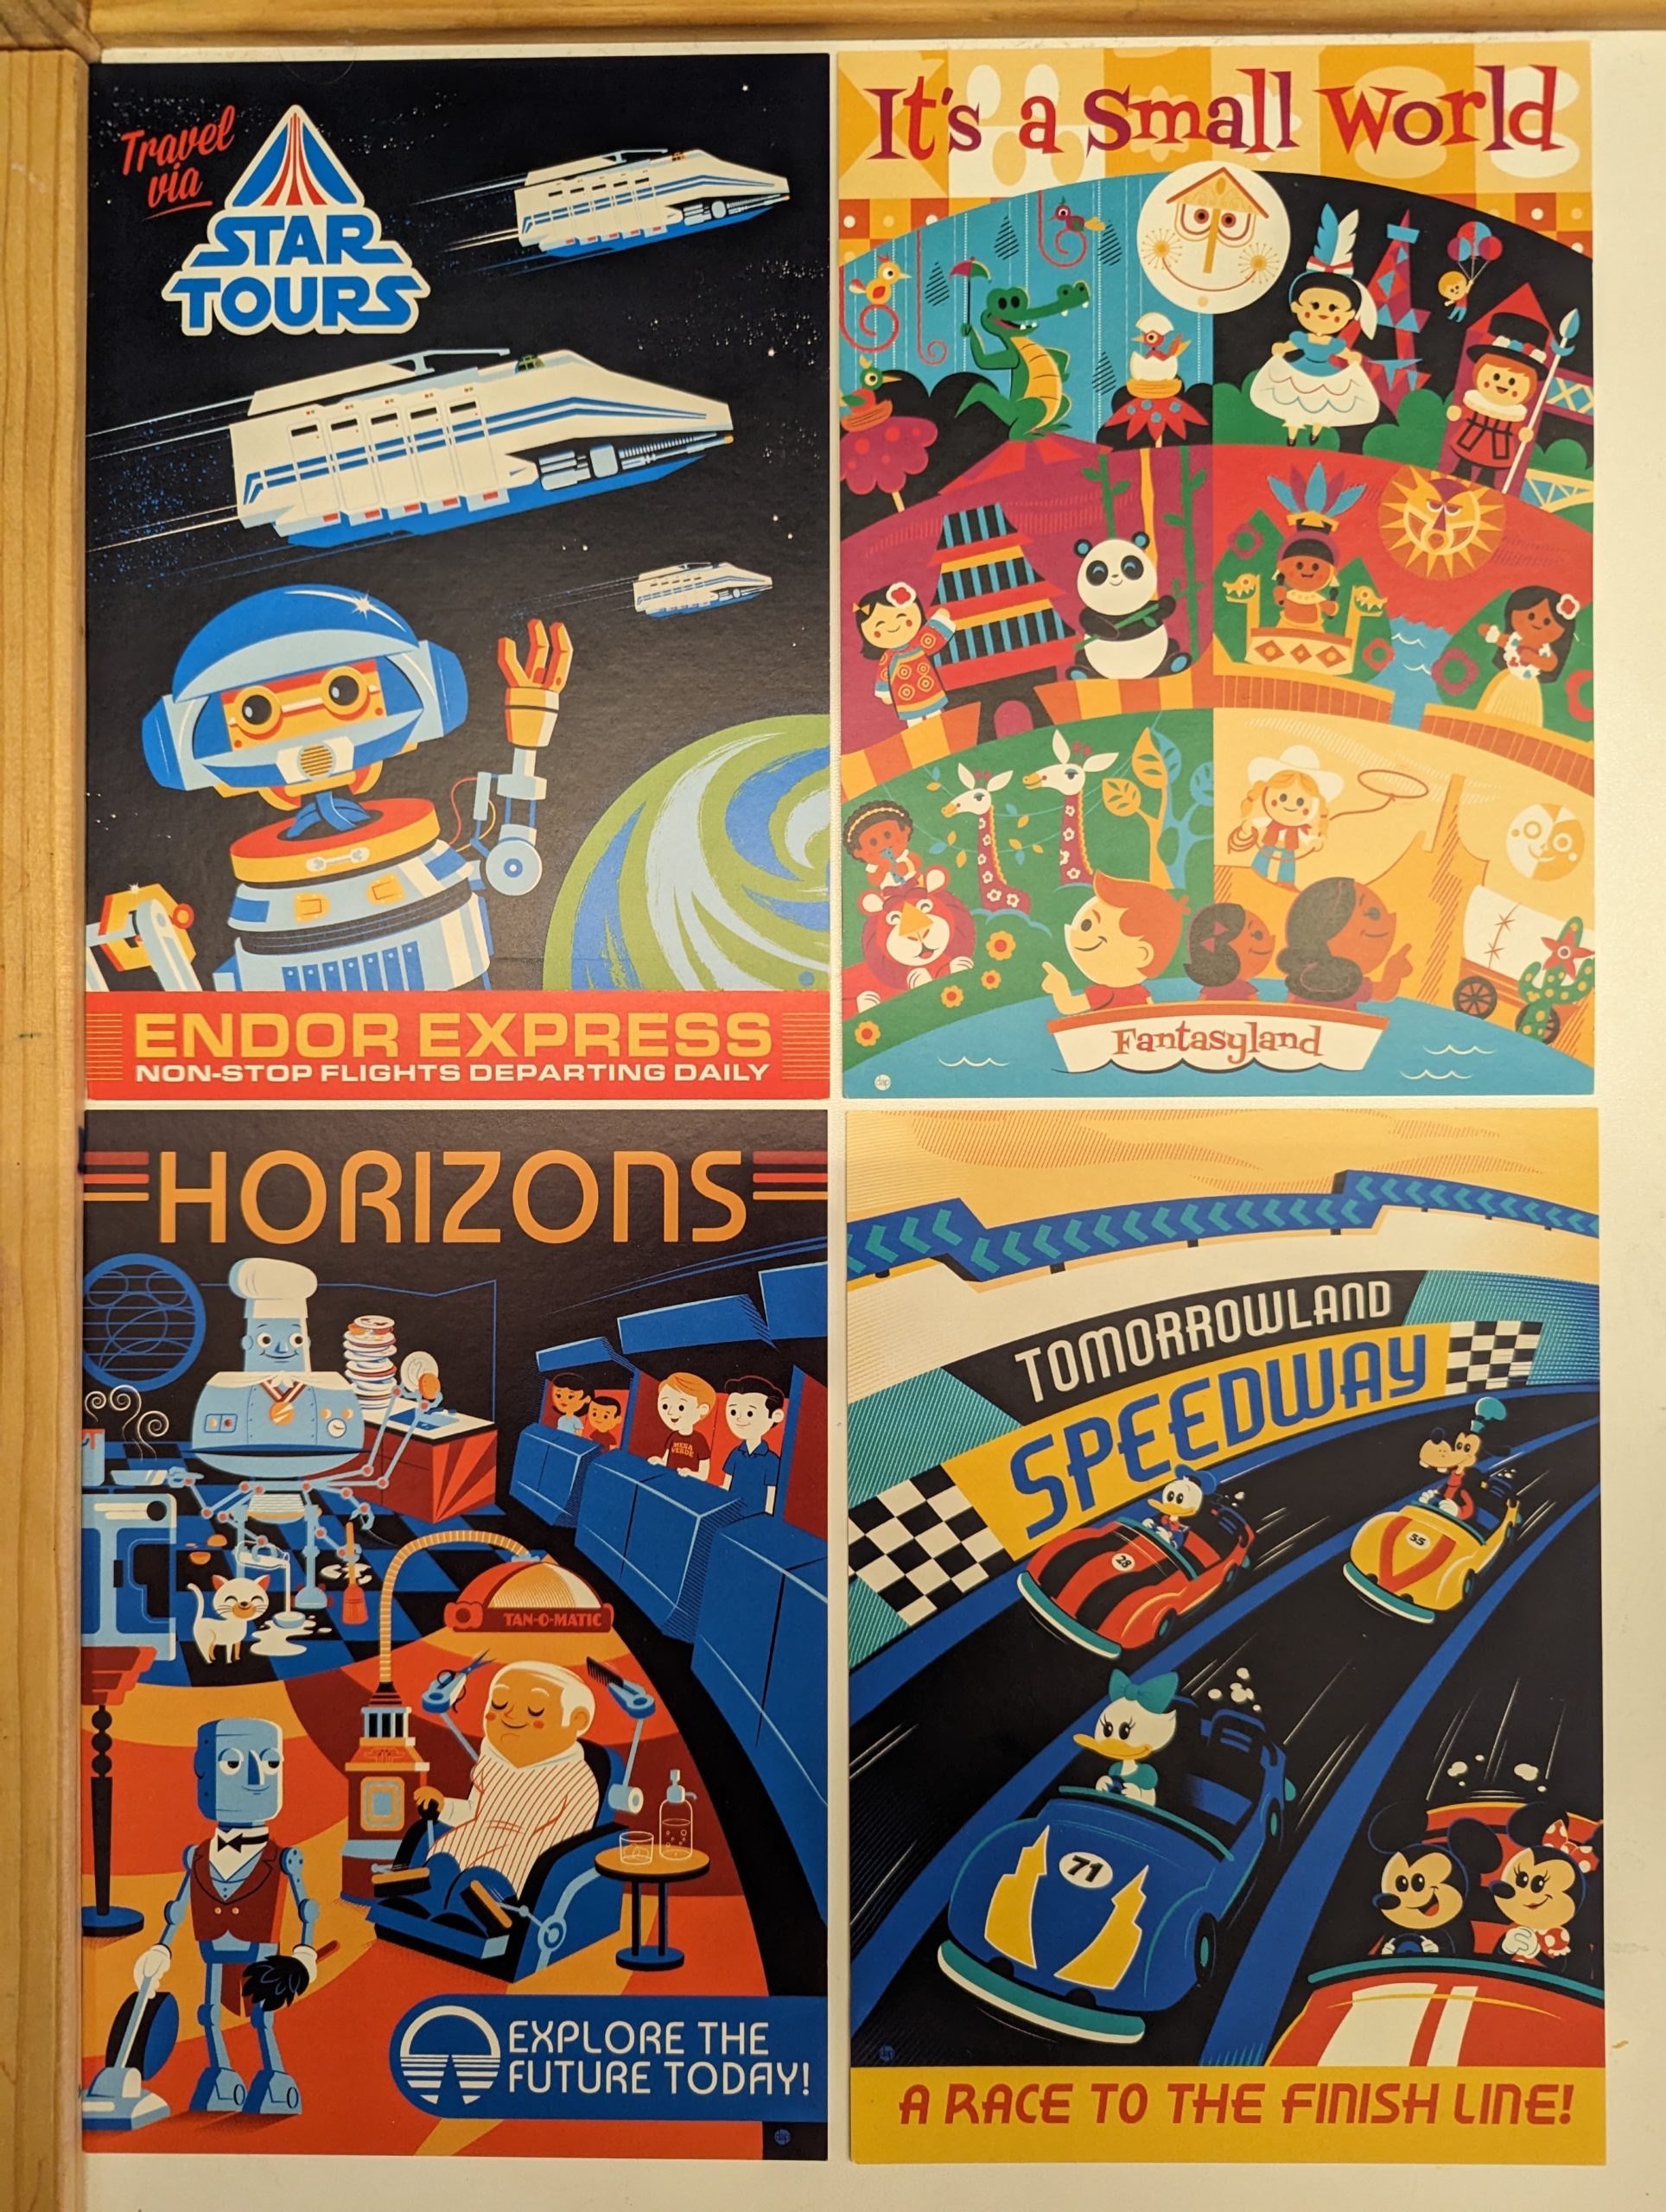 Four postcards by Dave Perillo: Star Tours, It's a Small World, Horizons, Tomorrowland Speedway